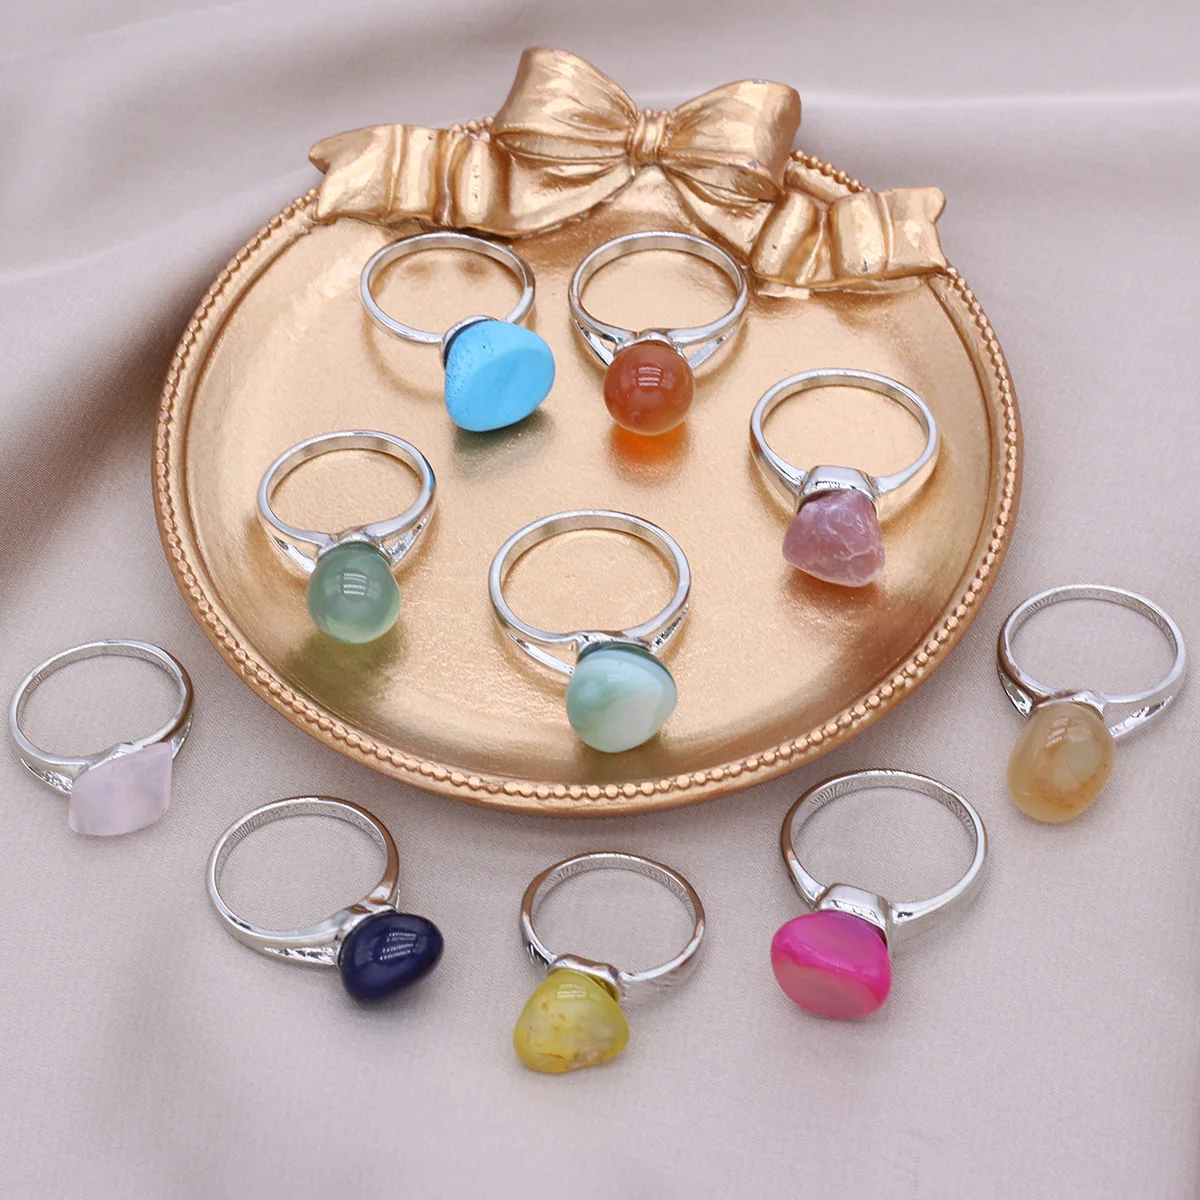 

10Pcs Ring Multi Style Combo Natural Stone White Stone Add color Ring Charm Wedding Banquet Party Ring For Woman Girls Jewellery